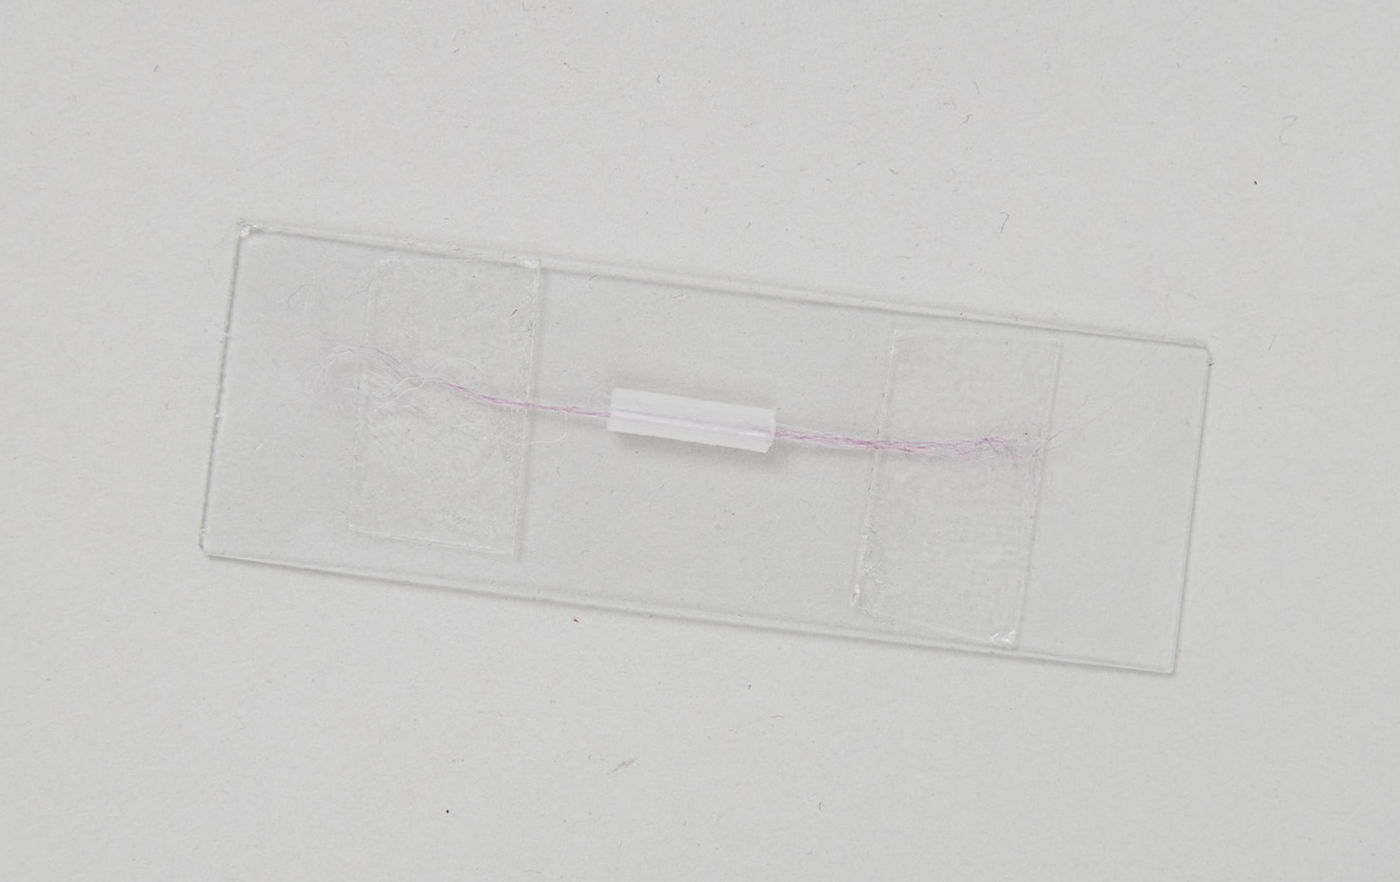 Fiber mounted on microscope slide. The fiber is threaded though the section of transfer pipette and held taut with double-sided tape at either end.